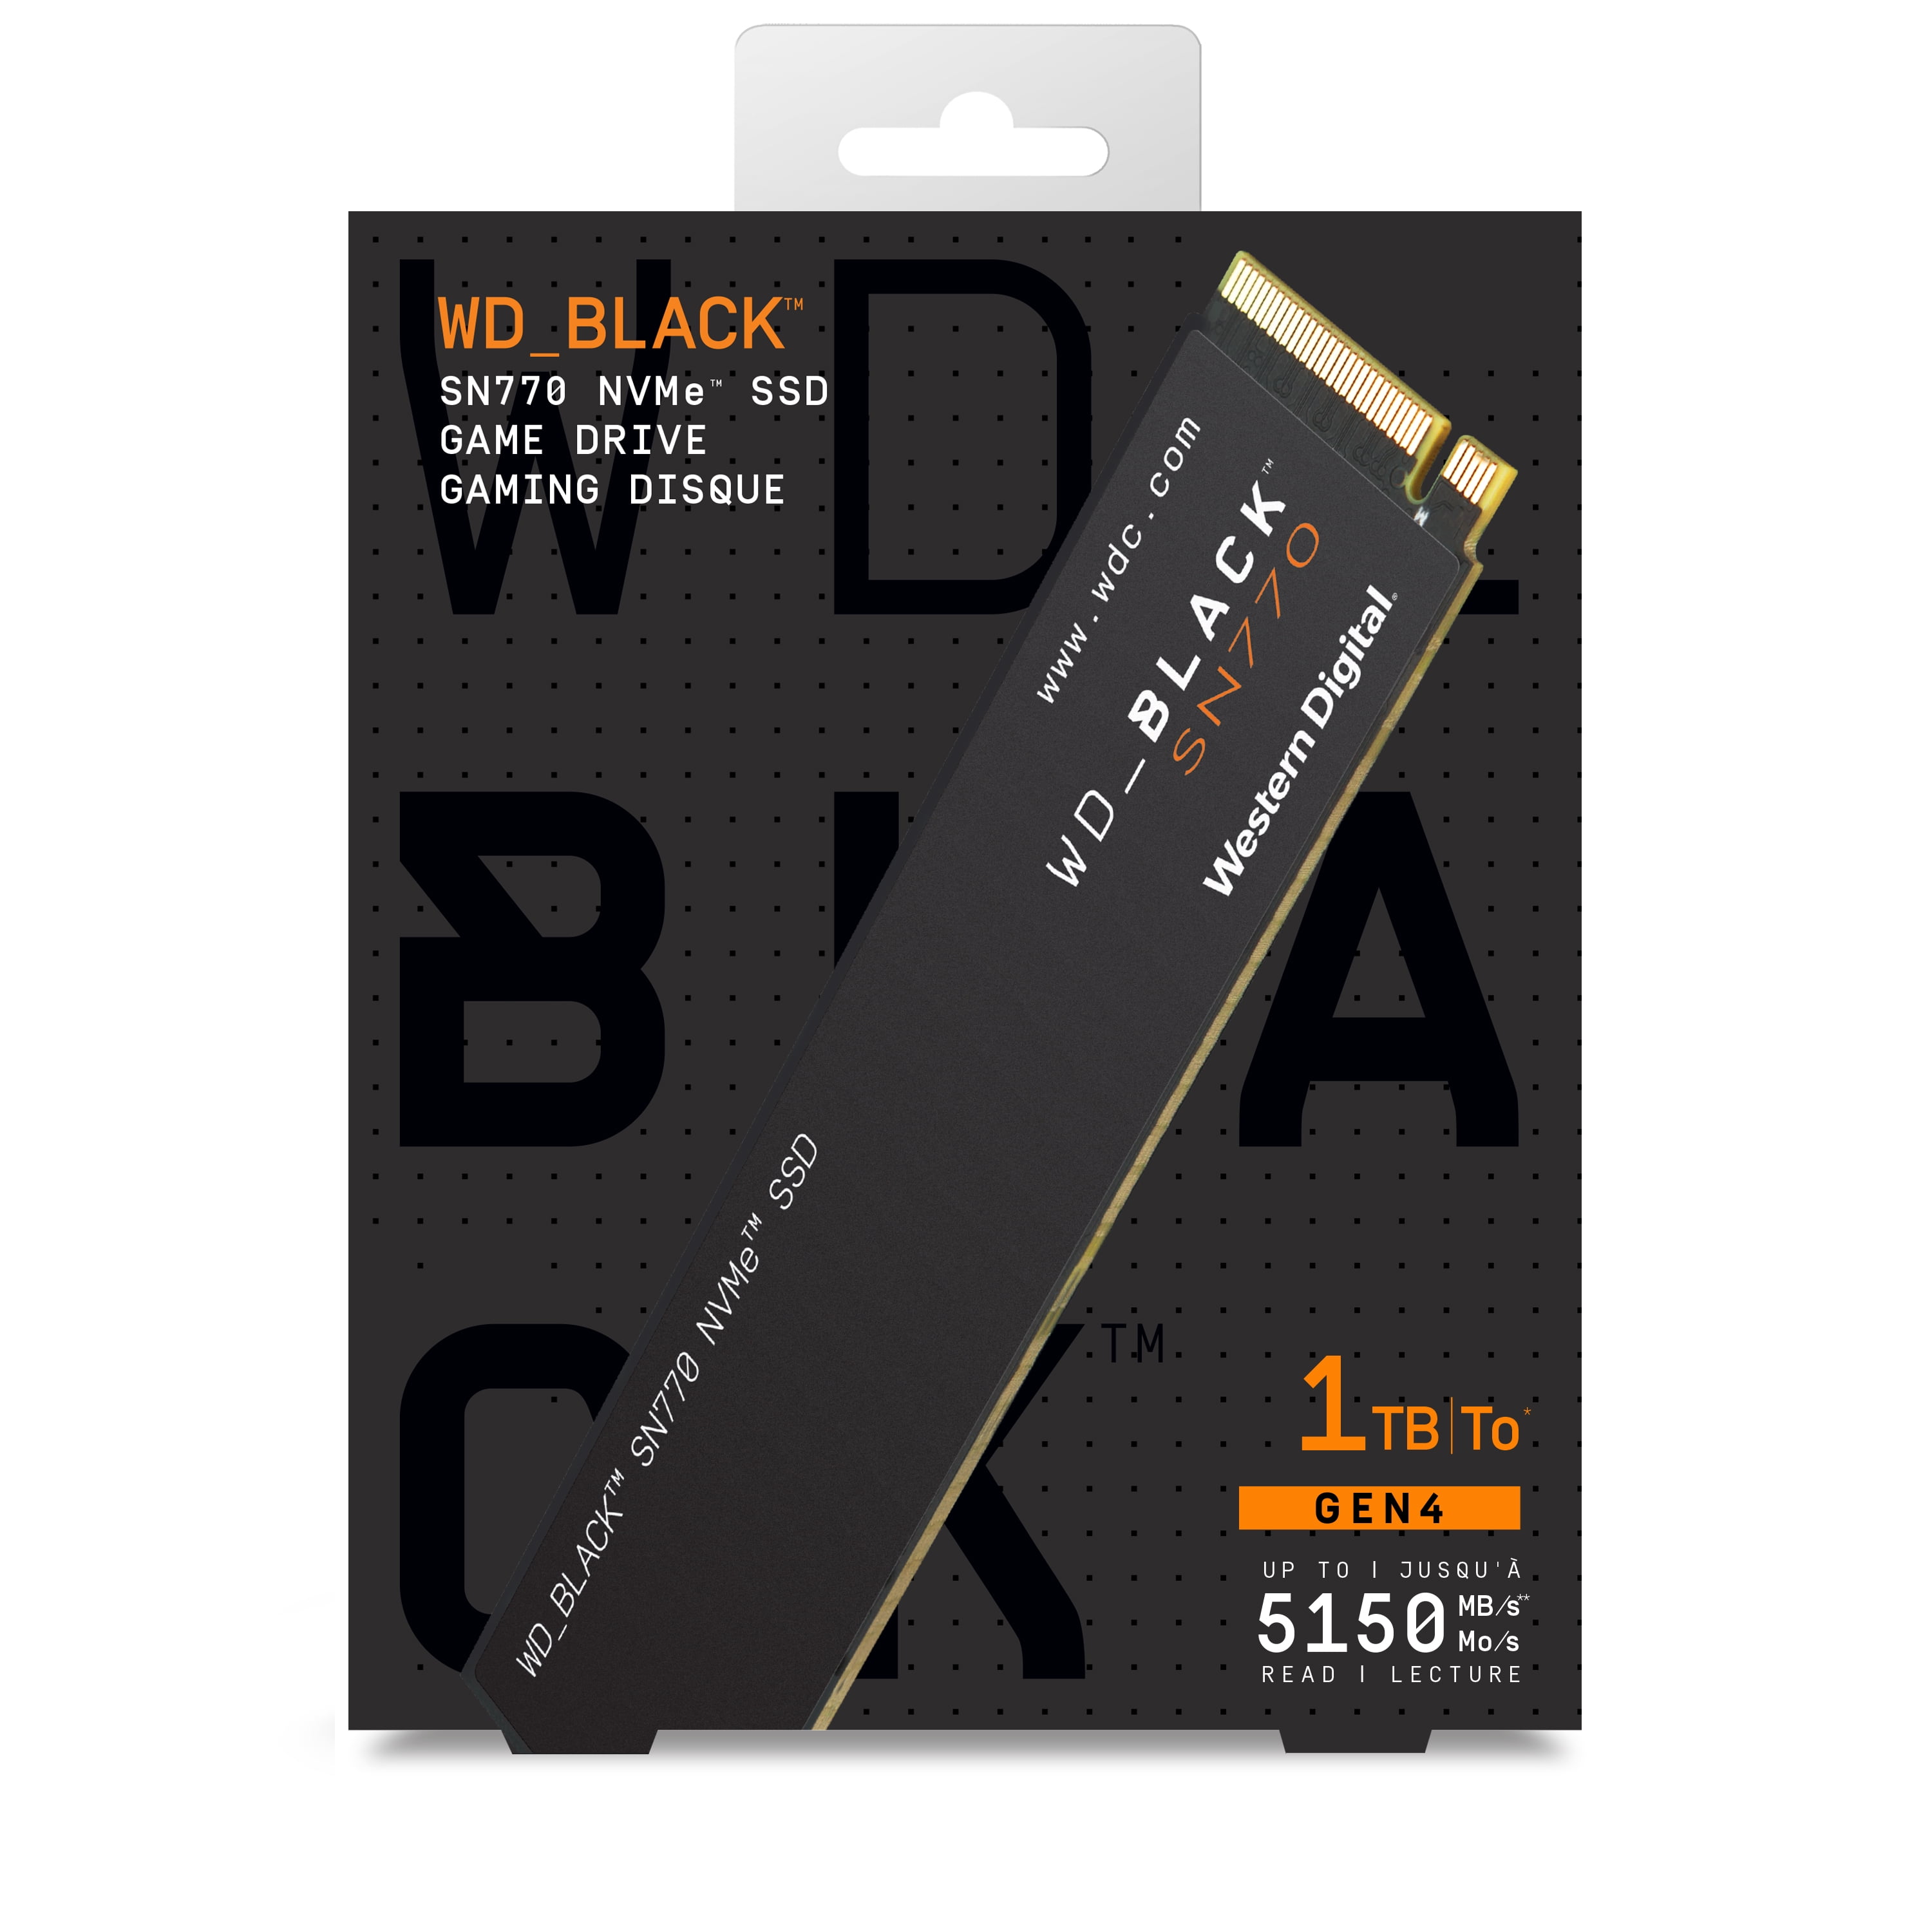 WD Black 1TB SN770 NVMe Internal Gaming SSD Solid State Drive - Gen4 PCIe,  M.2 2280, up to 5,150 MB/s - WDS100T3X0E